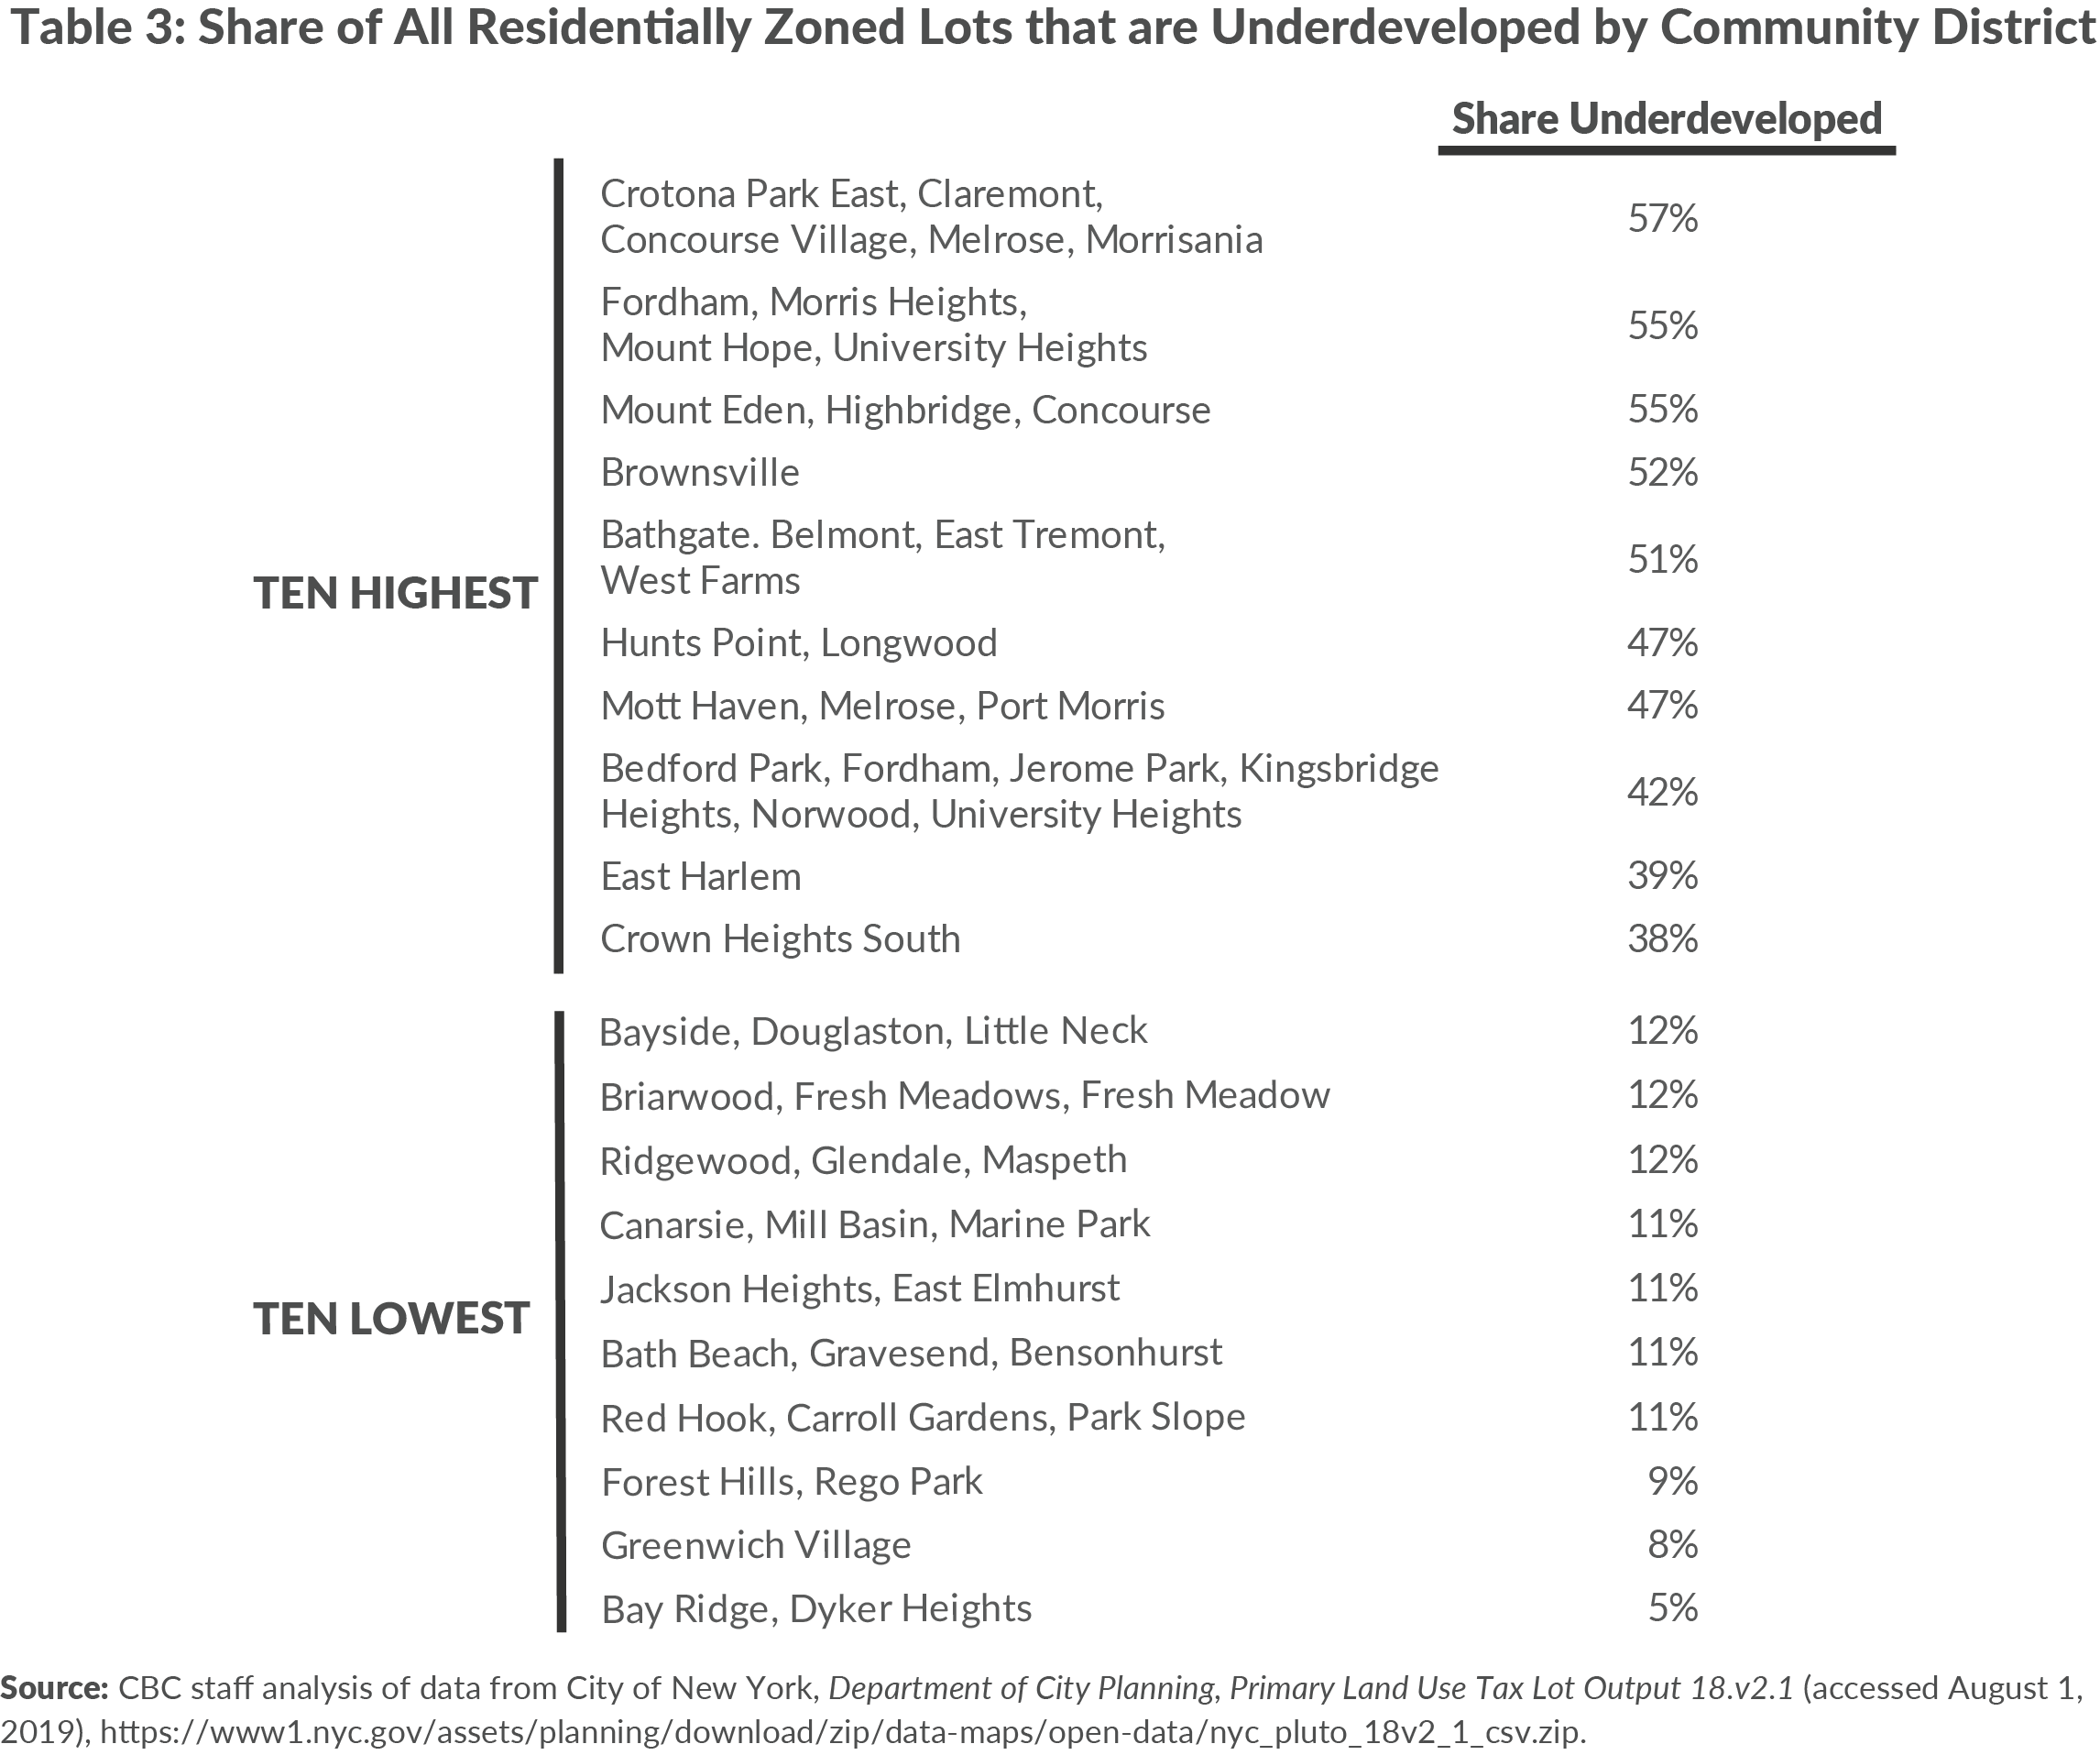 Table 3. Share of All Residentially Zoned Lots that are Underdeveloped by Community District, 2018